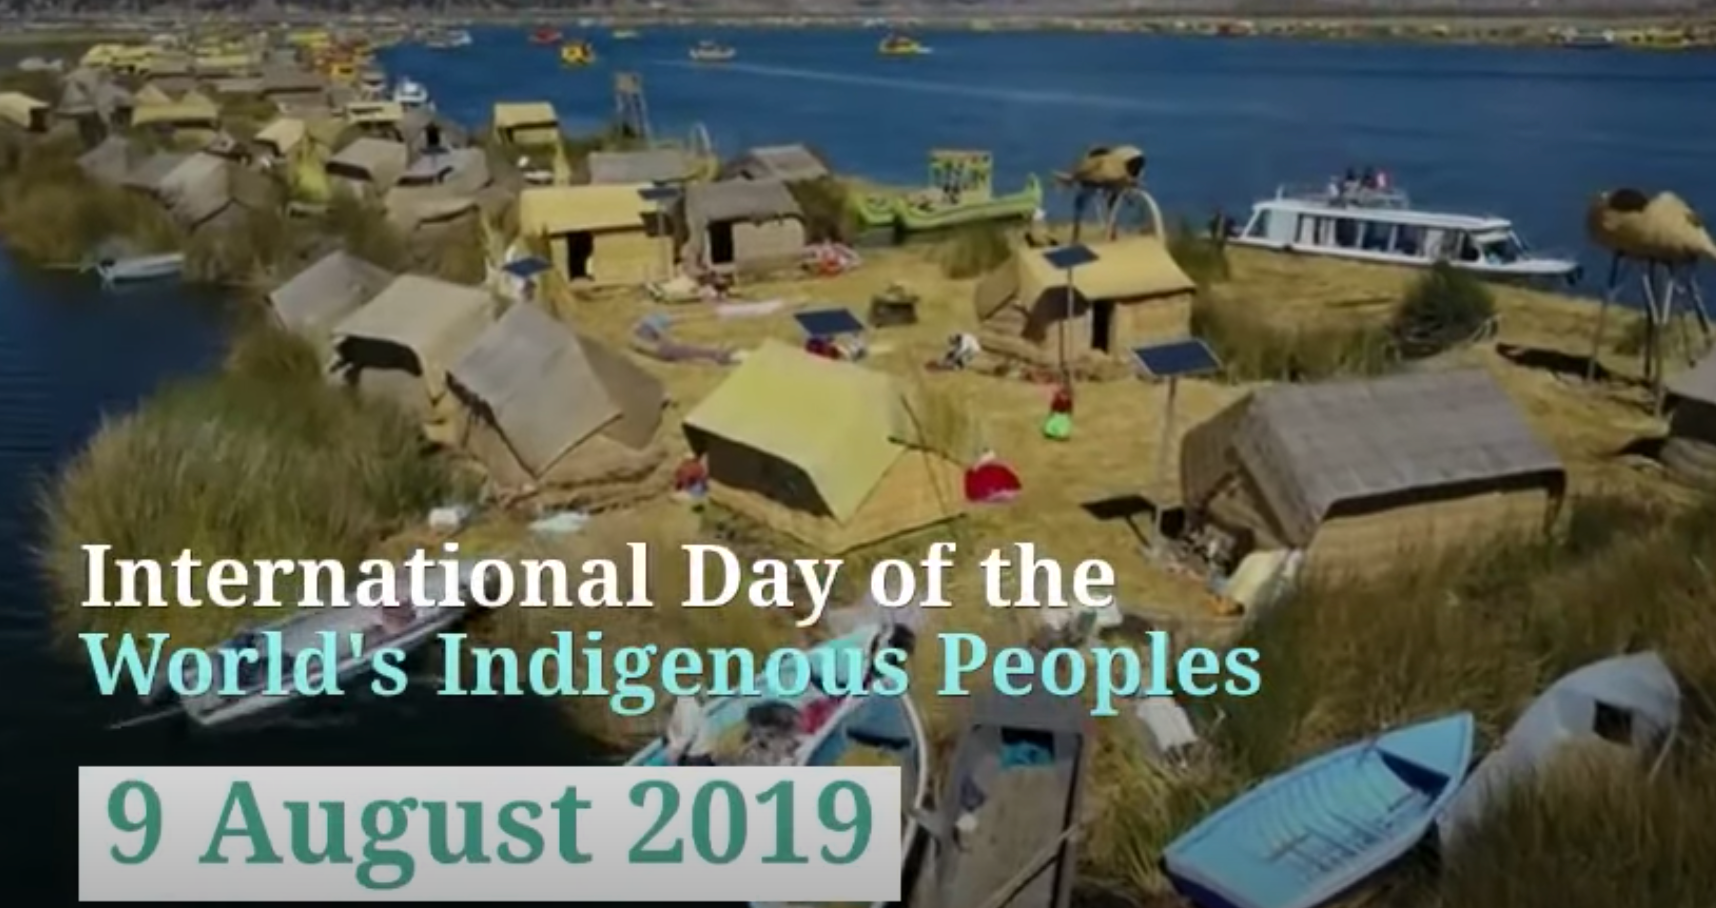 International Day of the World's Indigenous Peoples (9 August 2019)